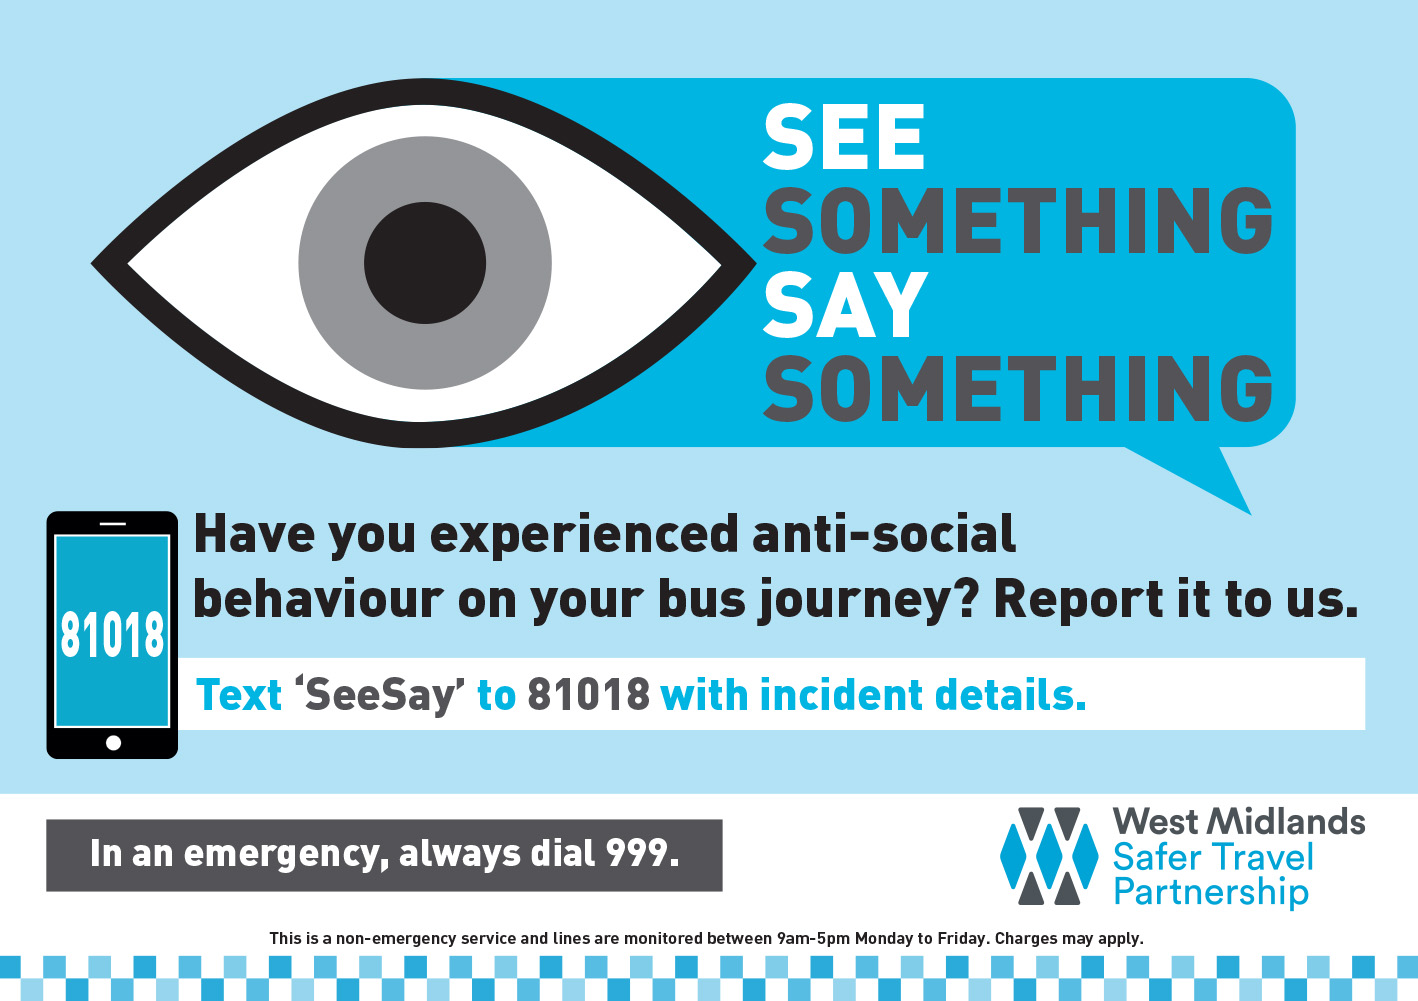 “See Something, Say Something” – how to report anti-social behaviour on public transport